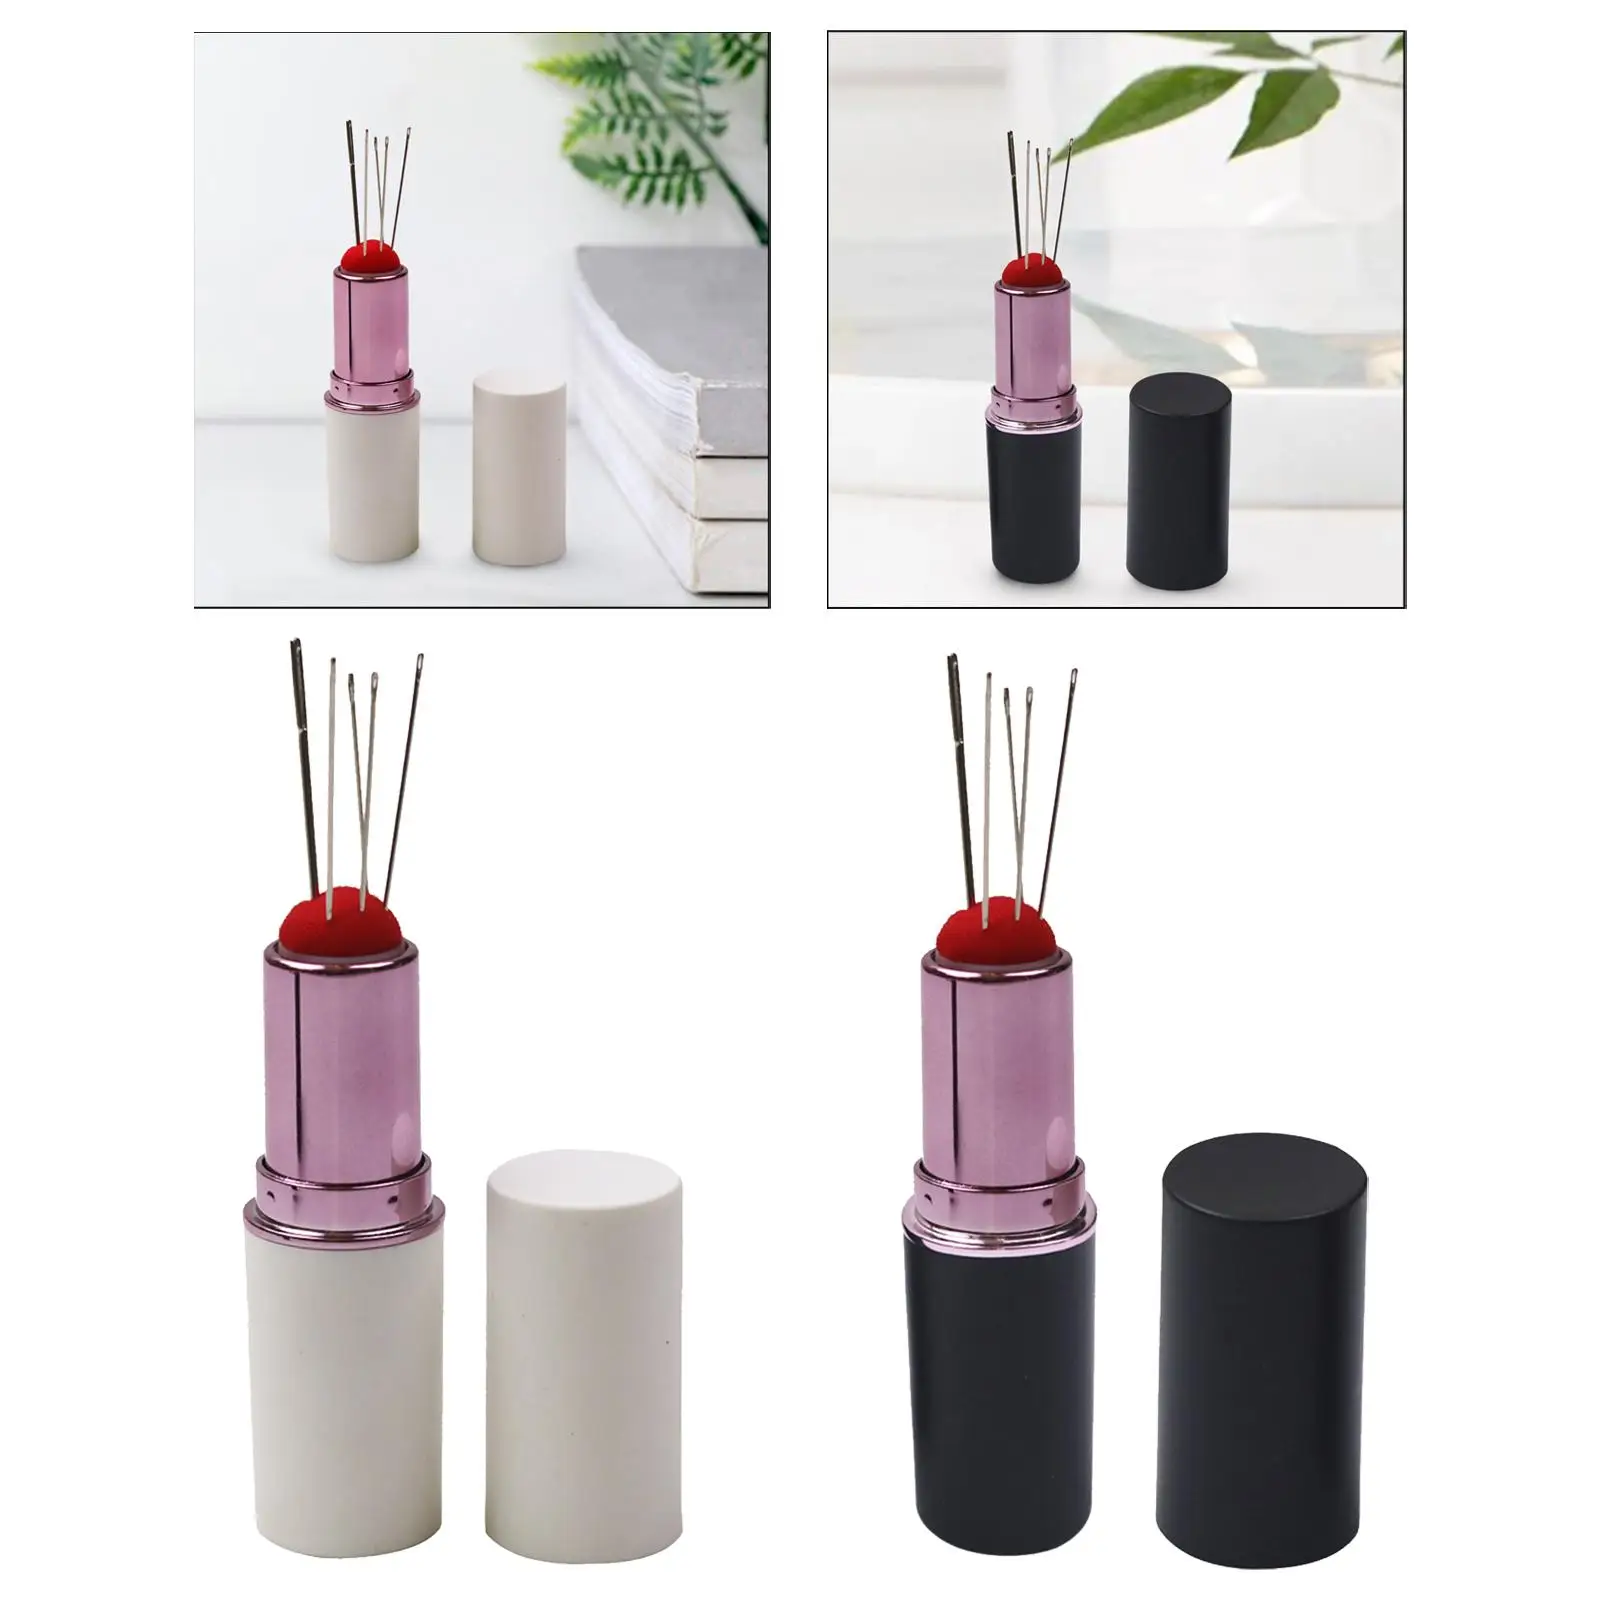 Lipstick Shaped Pin Cushion Pin Holder for Hand Needlework Knitting Quilting